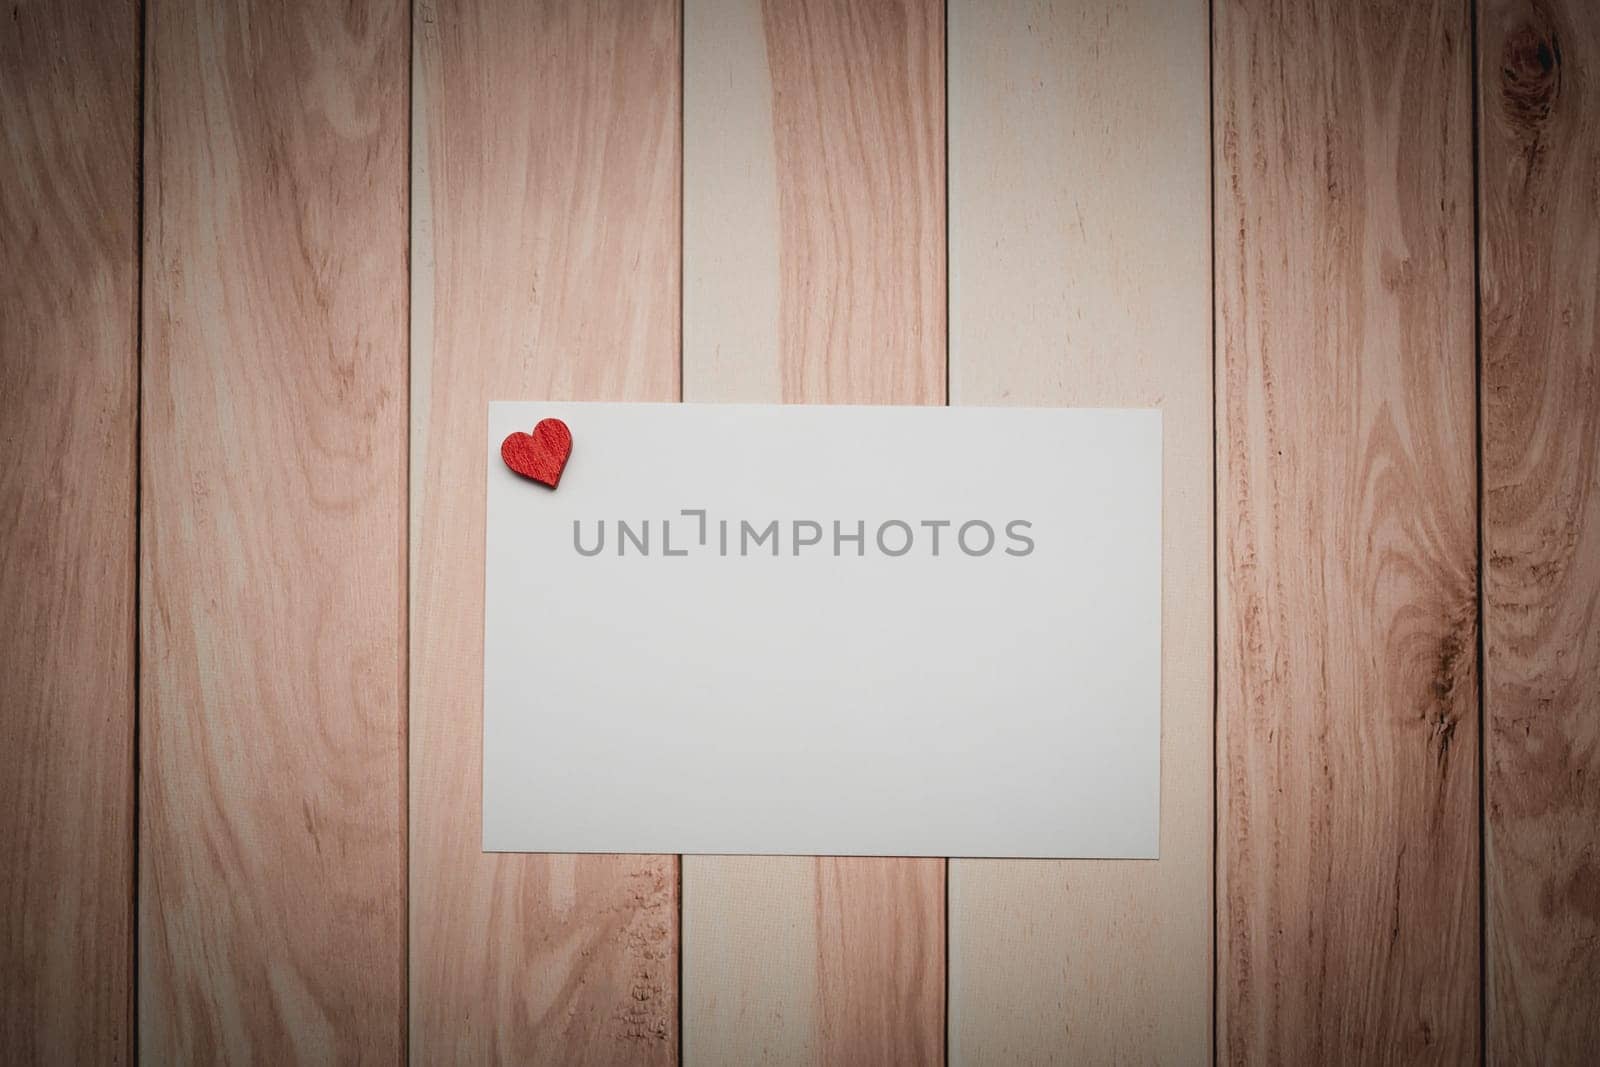 A conceptual white paper adorned with a love-themed red heart on a wooden table for Valentine's Day